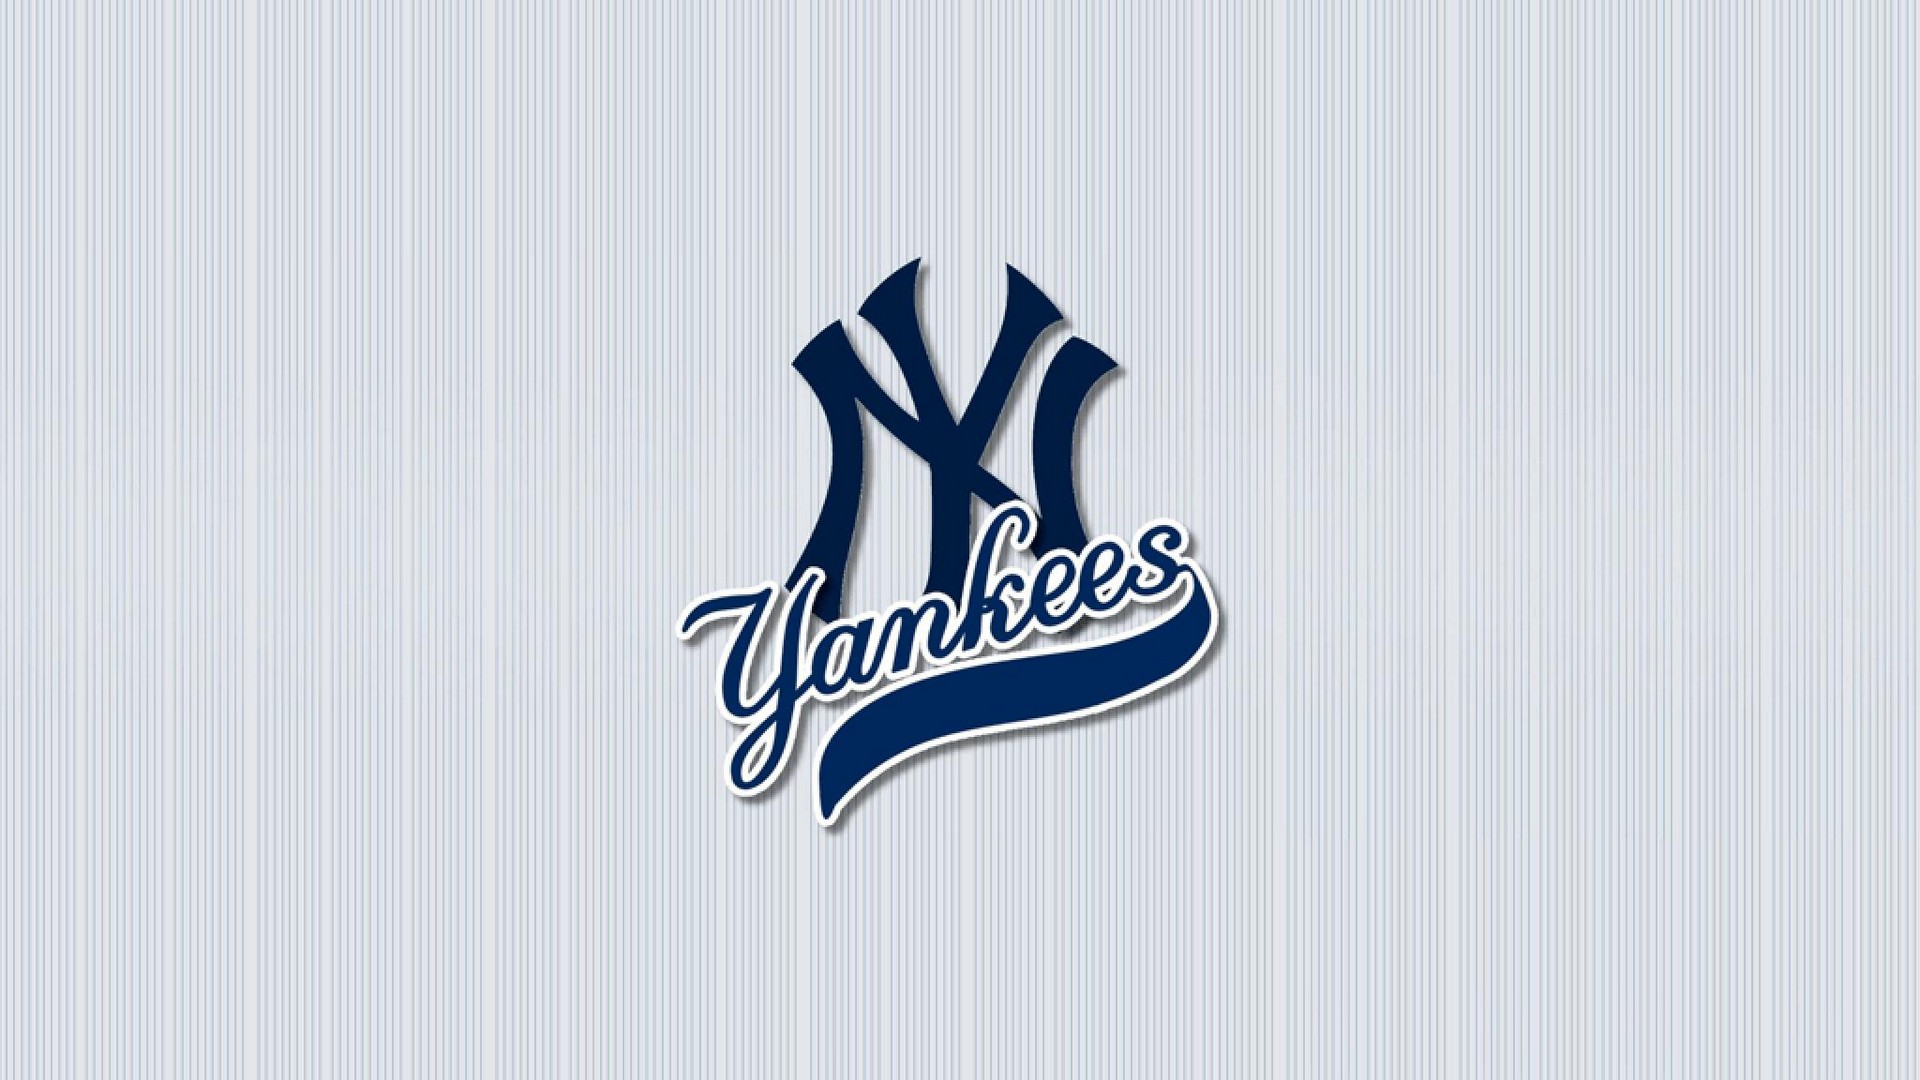 New York Yankees Wallpaper with high-resolution 1920x1080 pixel. You can use this wallpaper for Mac Desktop Wallpaper, Laptop Screensavers, Android Wallpapers, Tablet or iPhone Home Screen and another mobile phone device